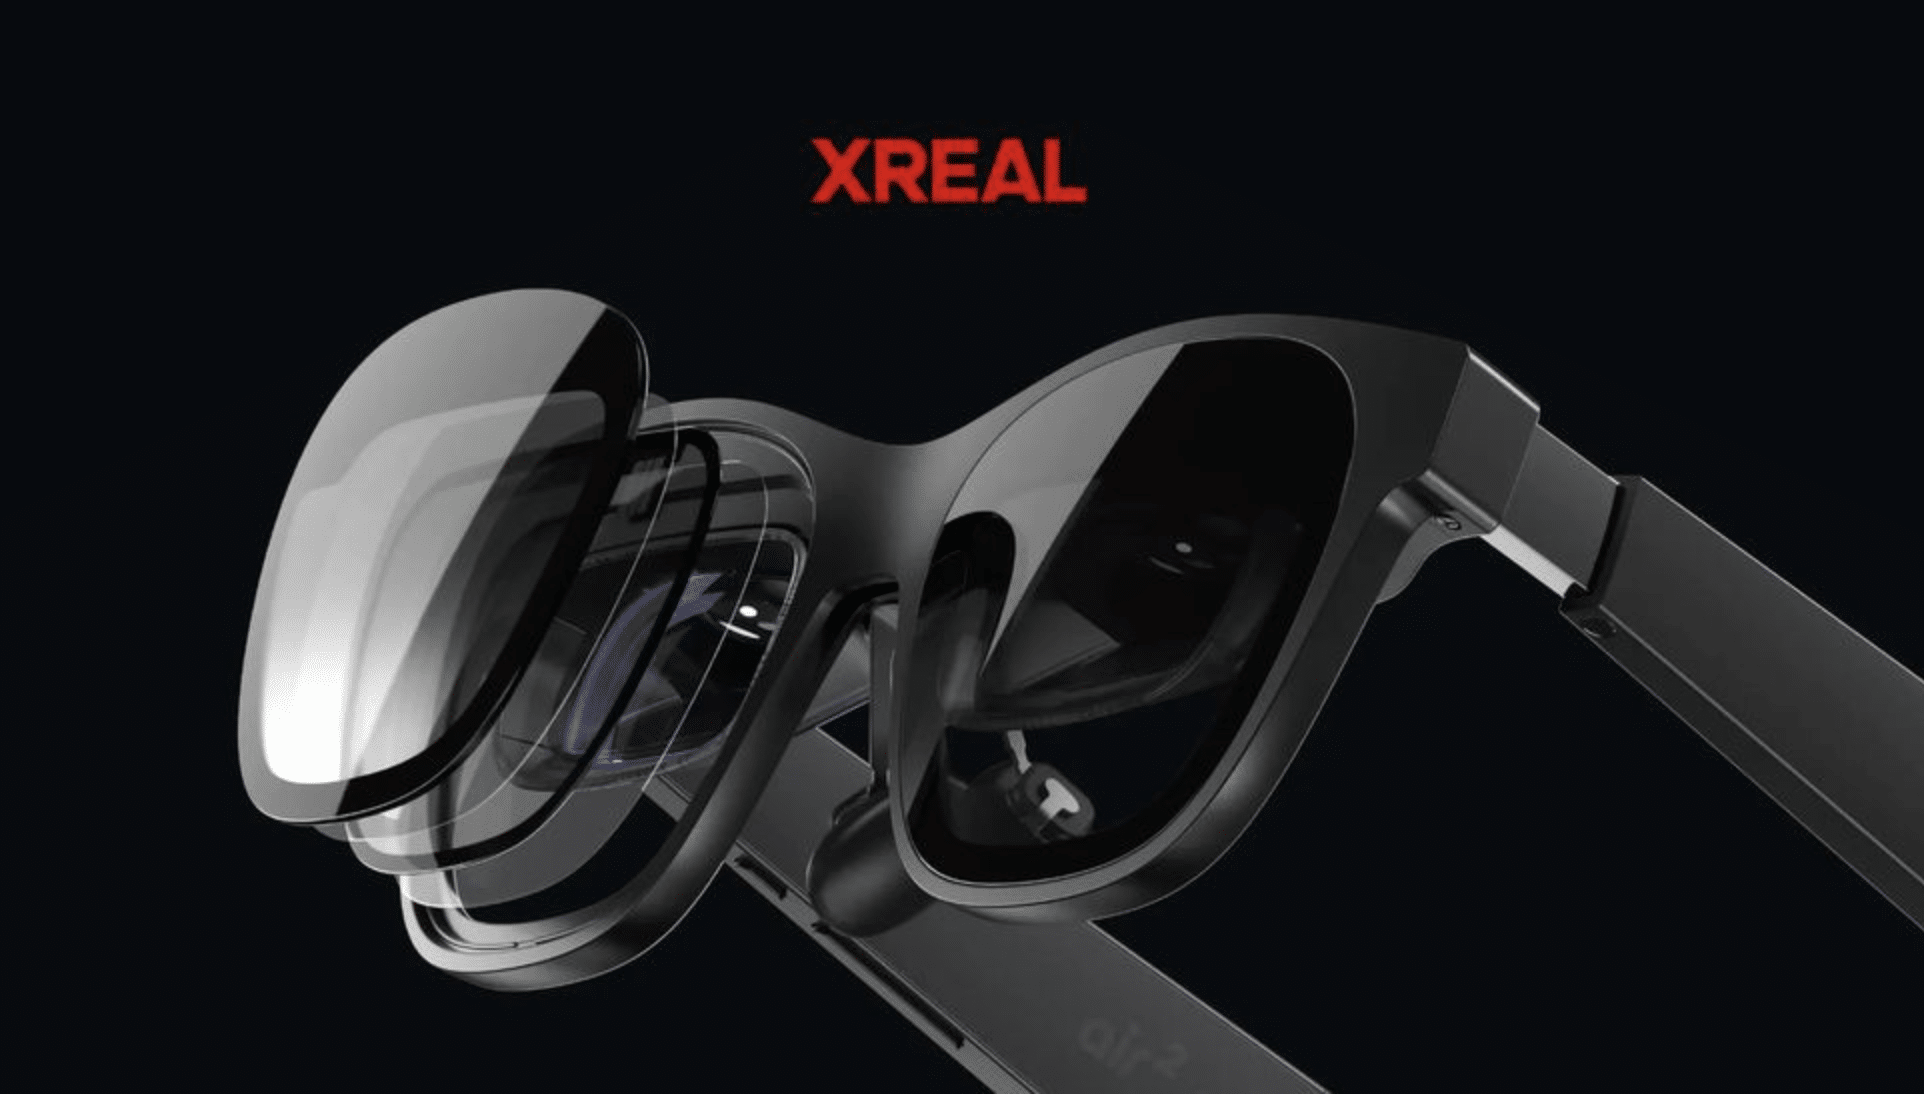 Xreal Launches Second Generation of their TV Glasses